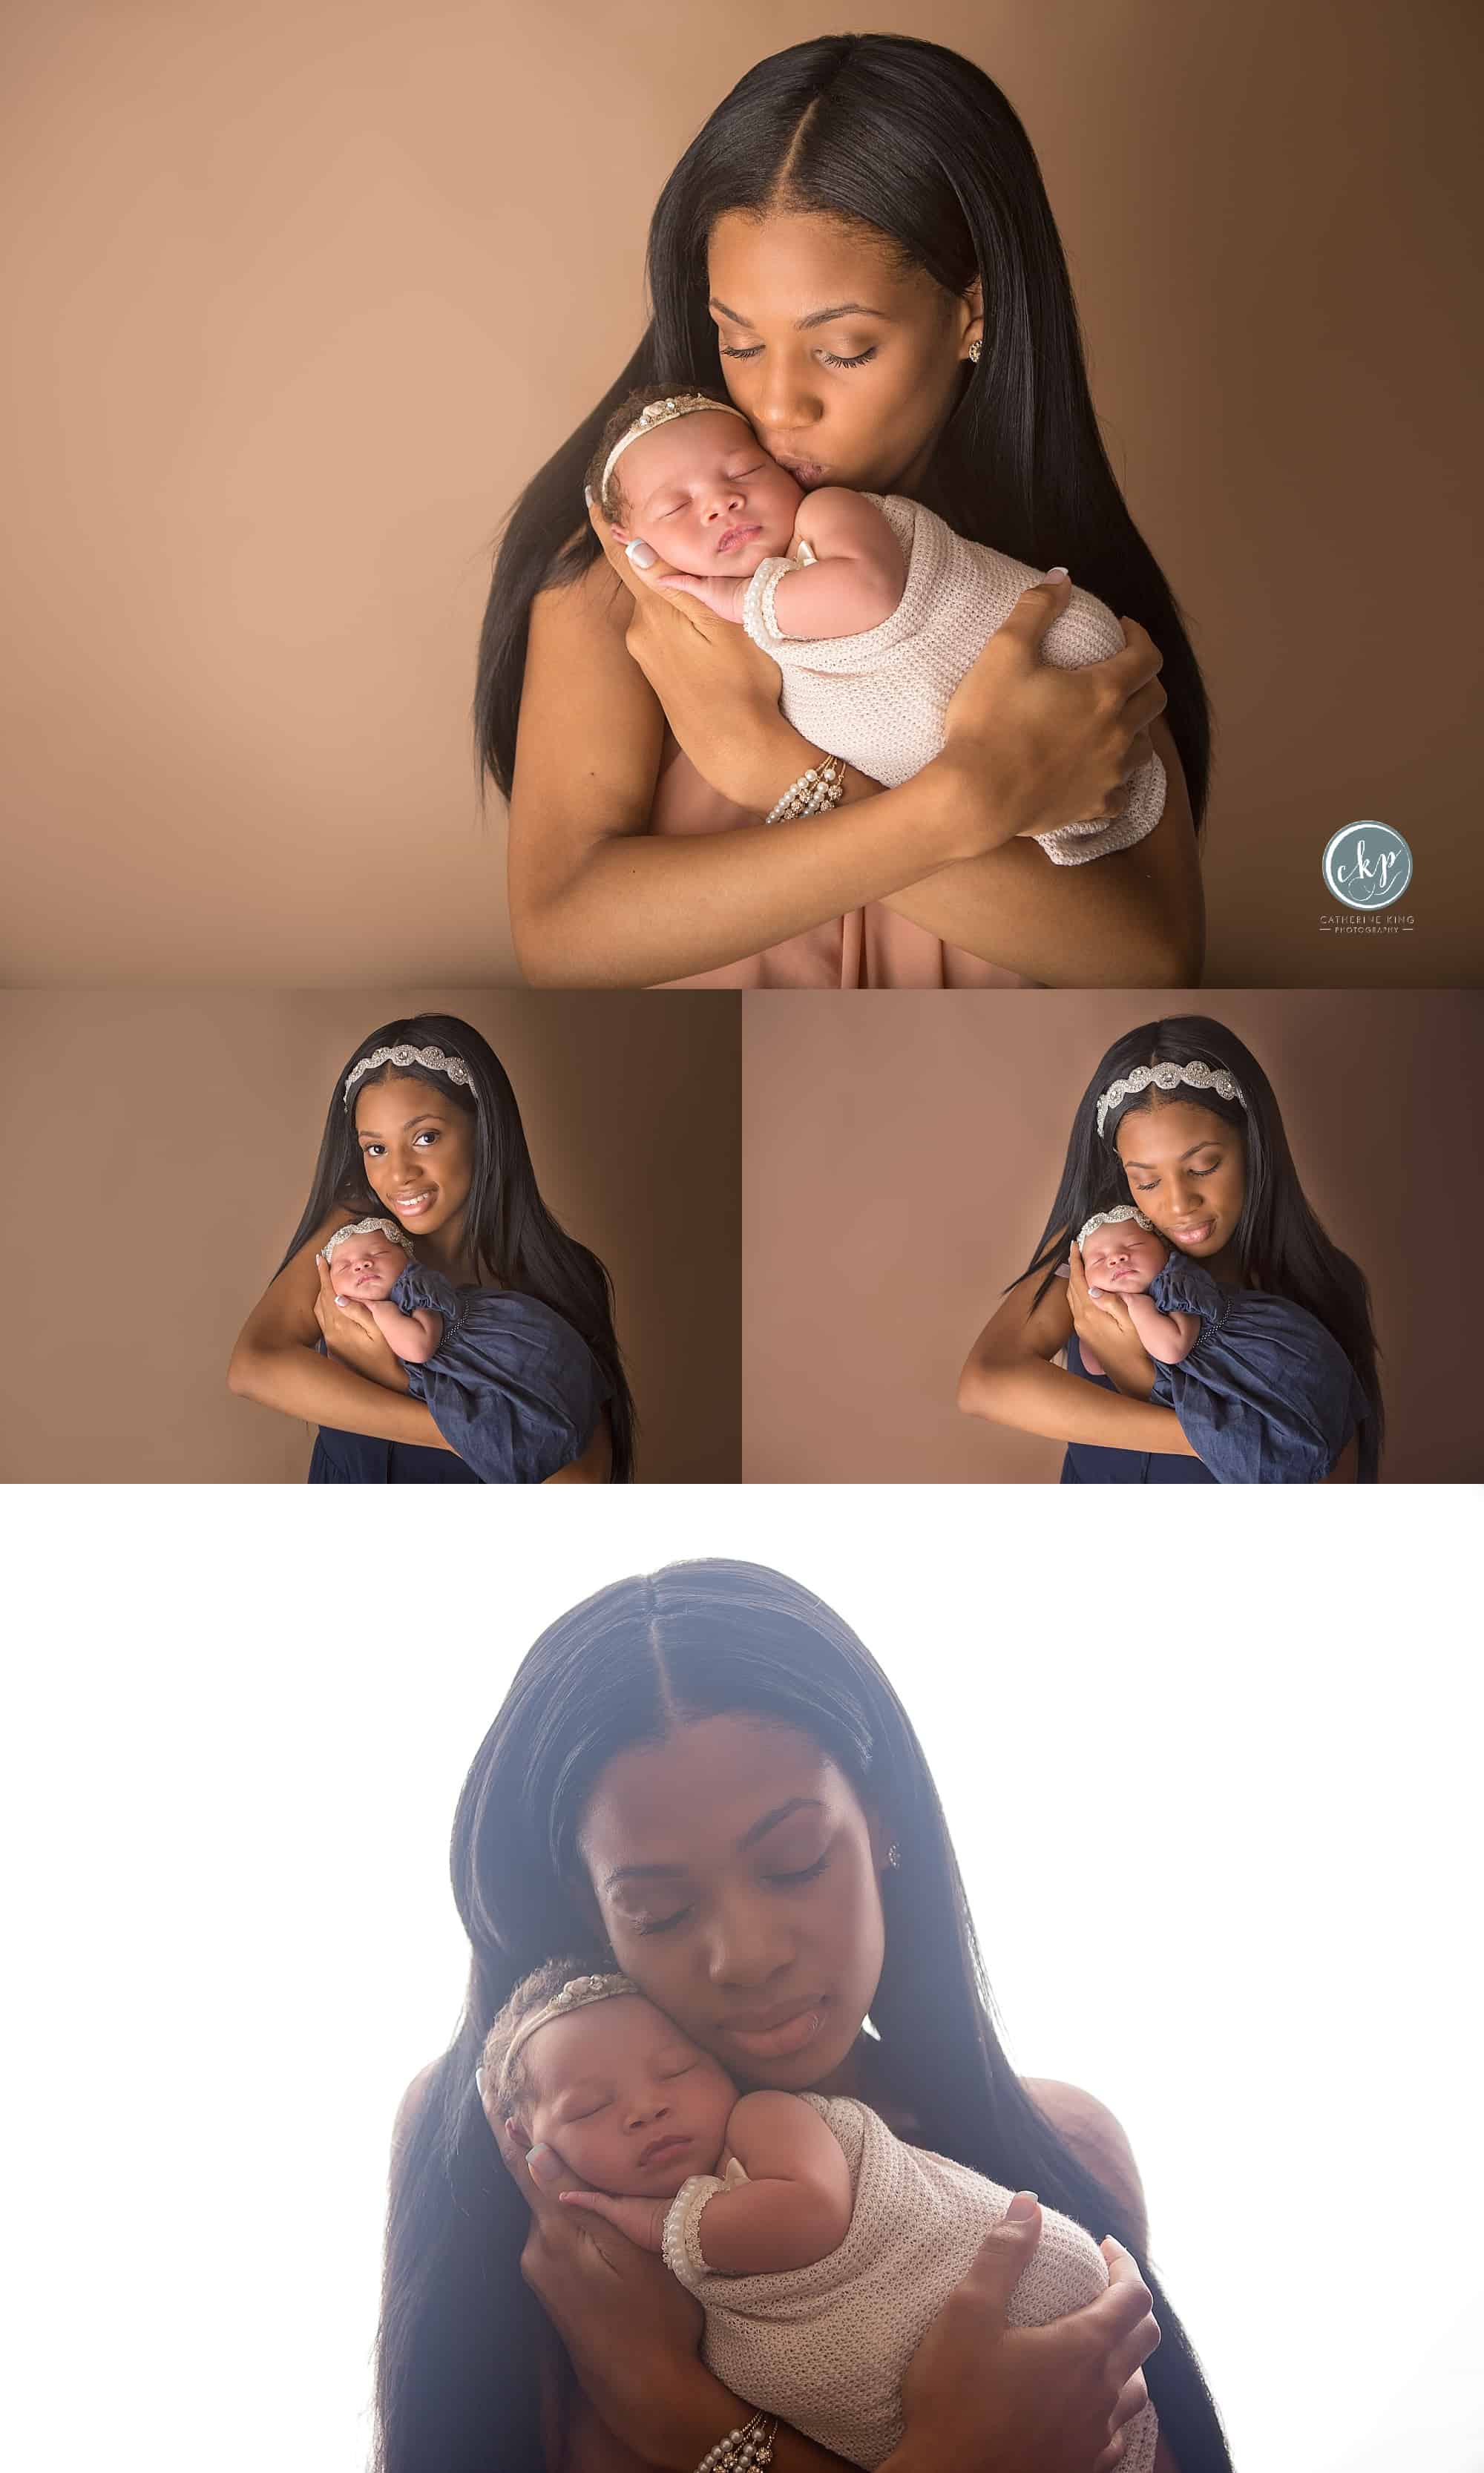 Breighlyn, 7 day old baby in madison ct studio photographed by catherine king photography a ct newborn phtoographer